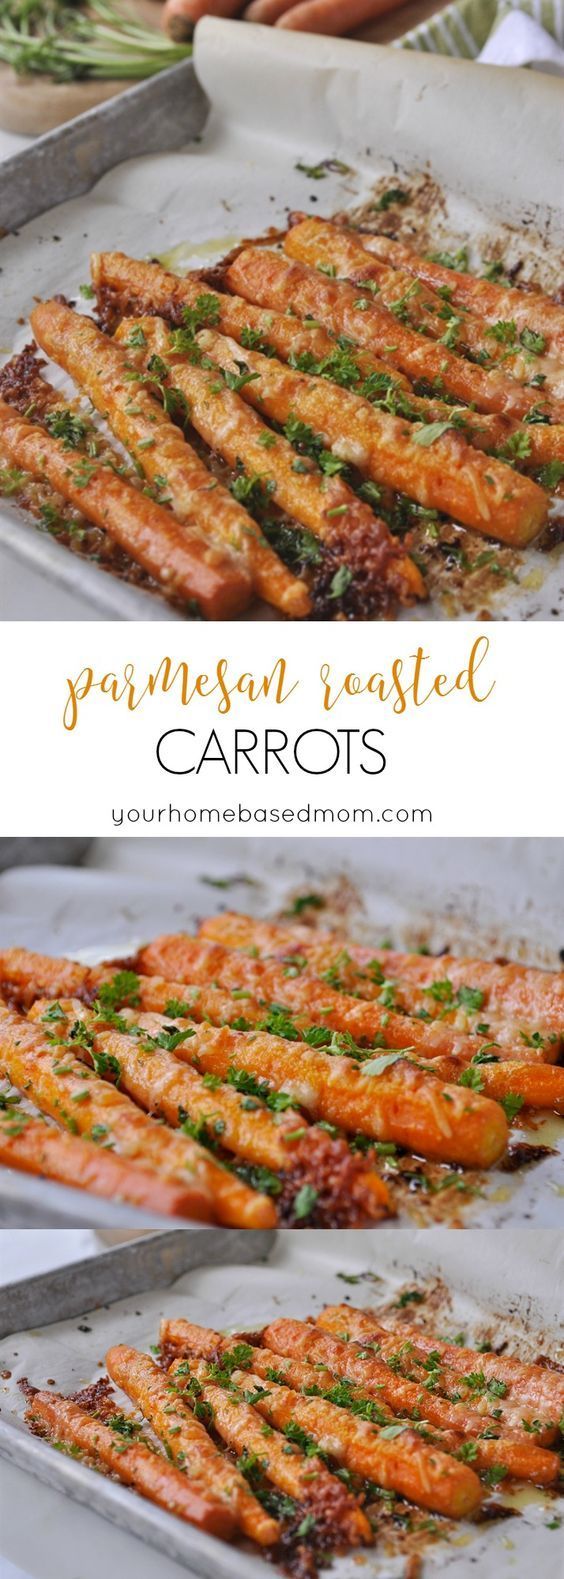 Parmesan Roasted Carrots – the perfect way to get your family to eat their veggies